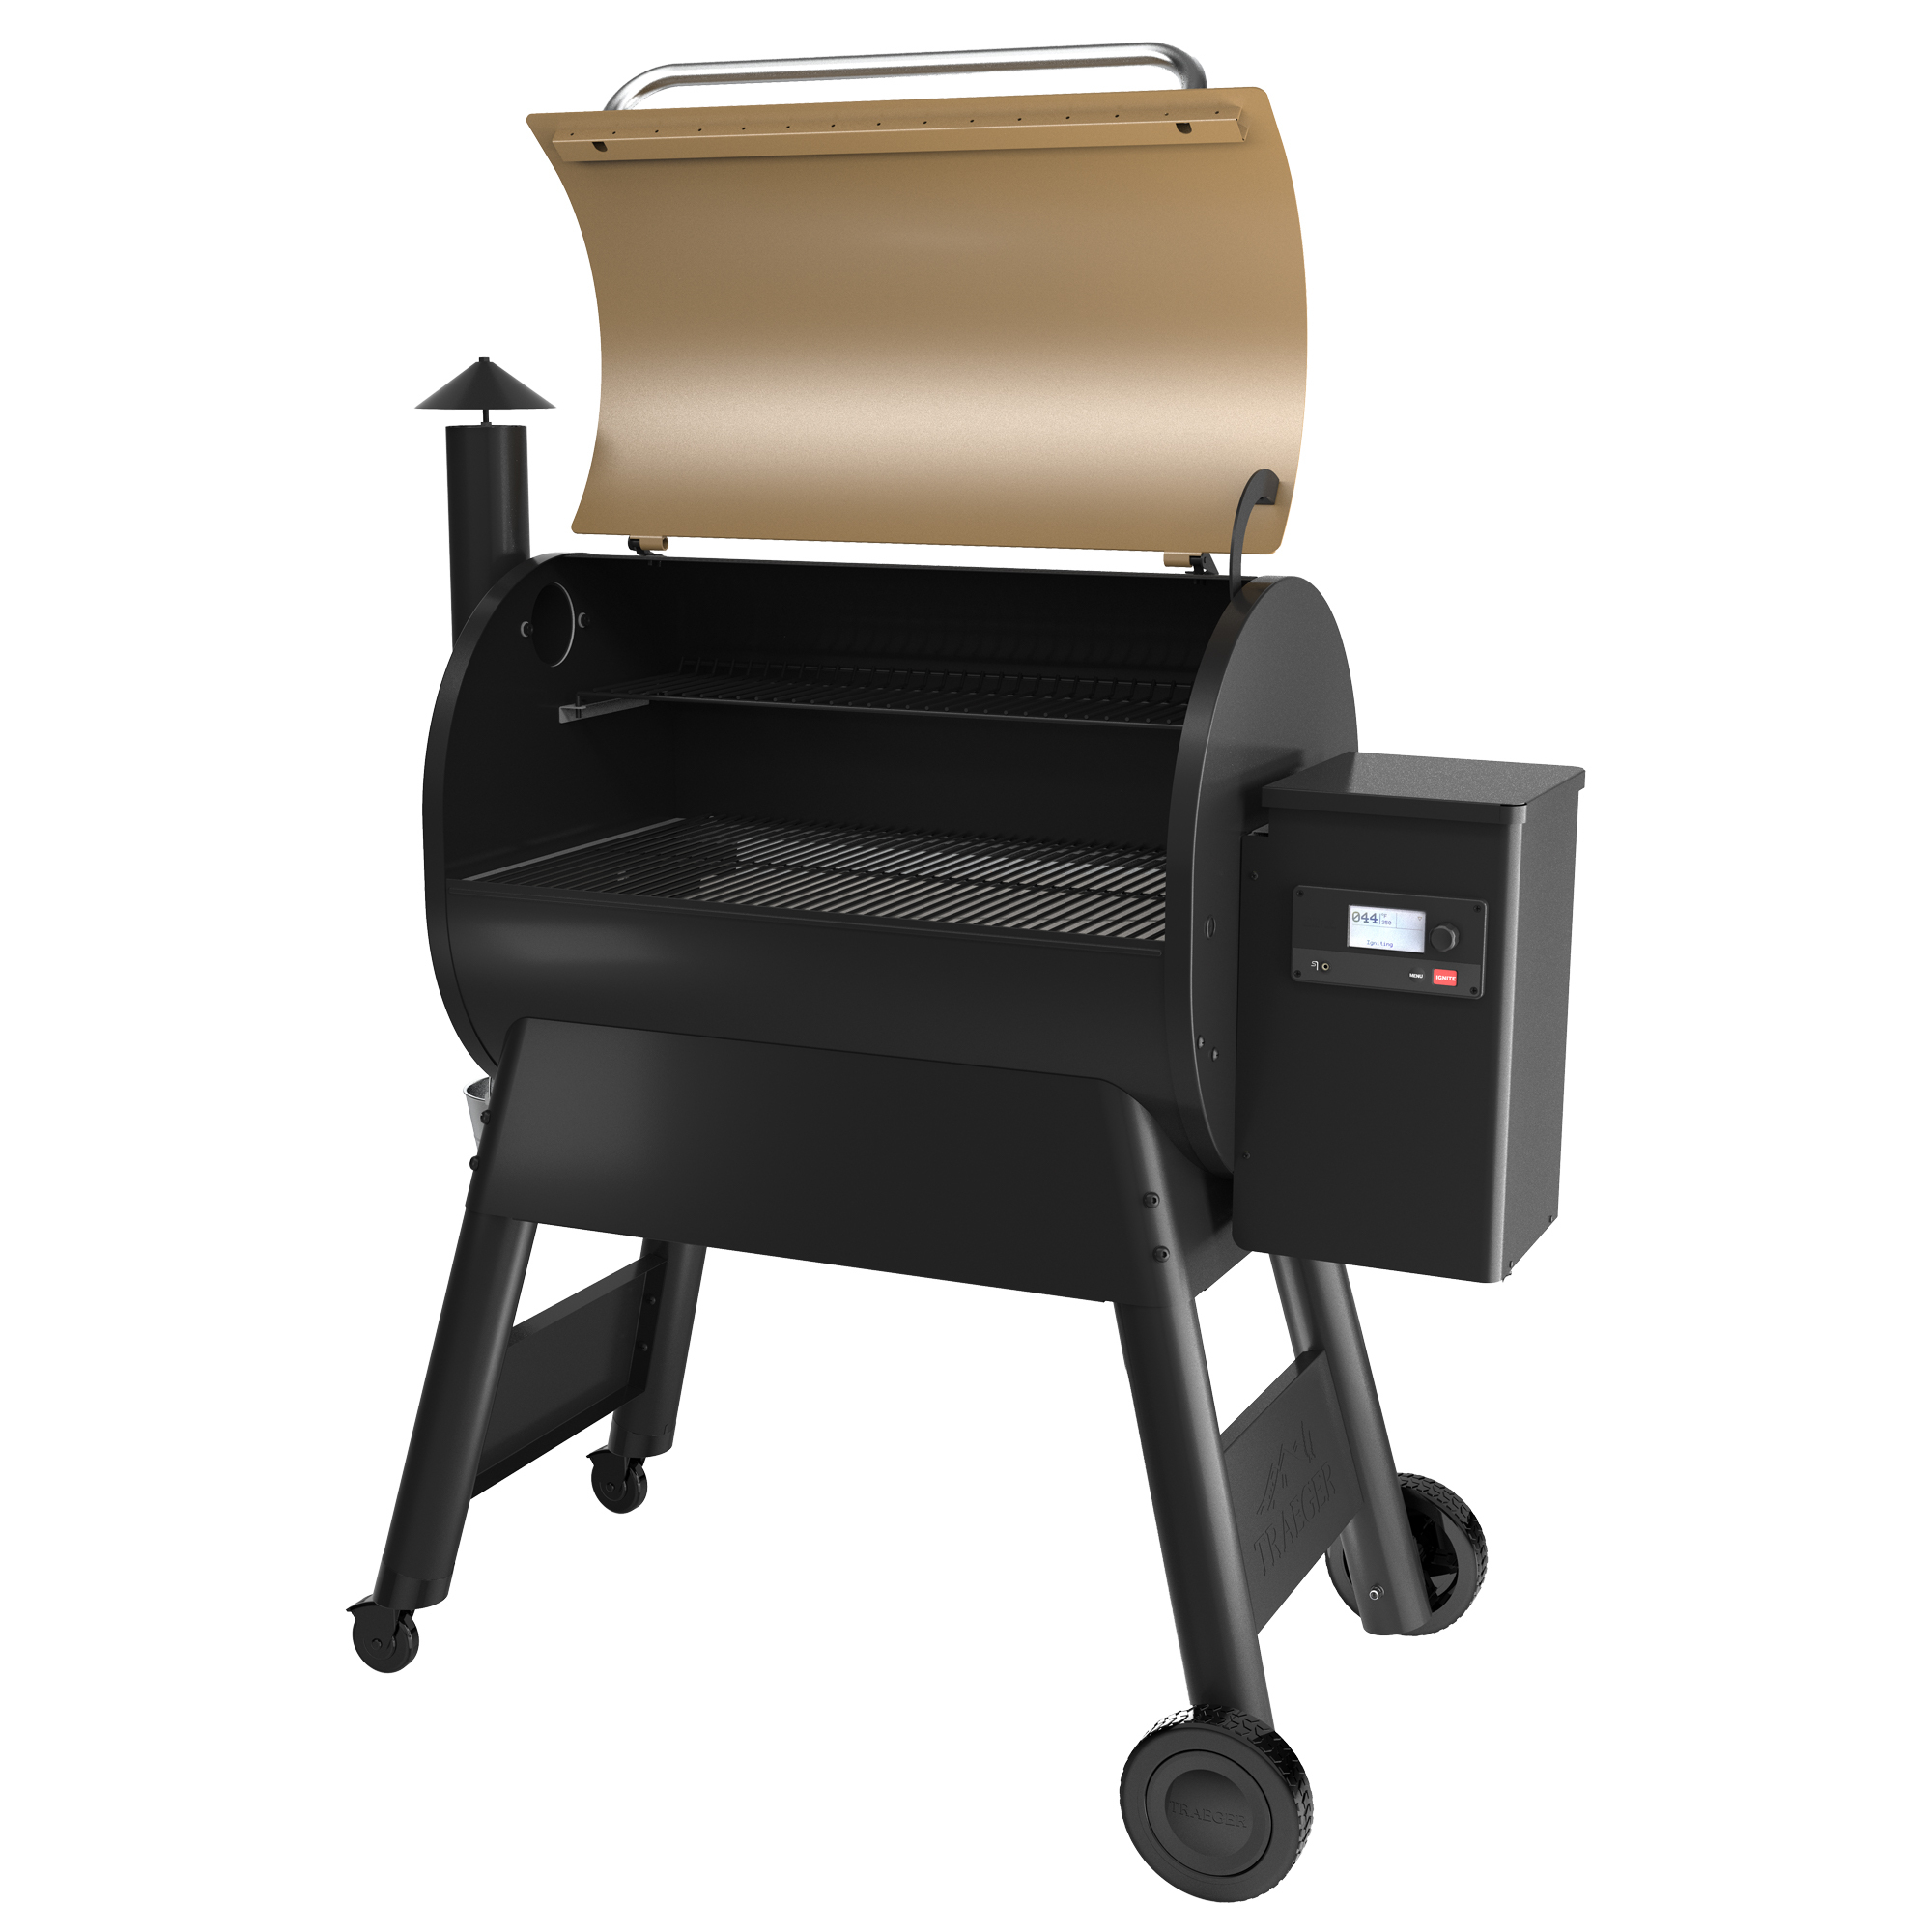 Traeger Pellet Grills Pro 780 Wood Pellet Grill and Smoker - Bronze - image 5 of 12